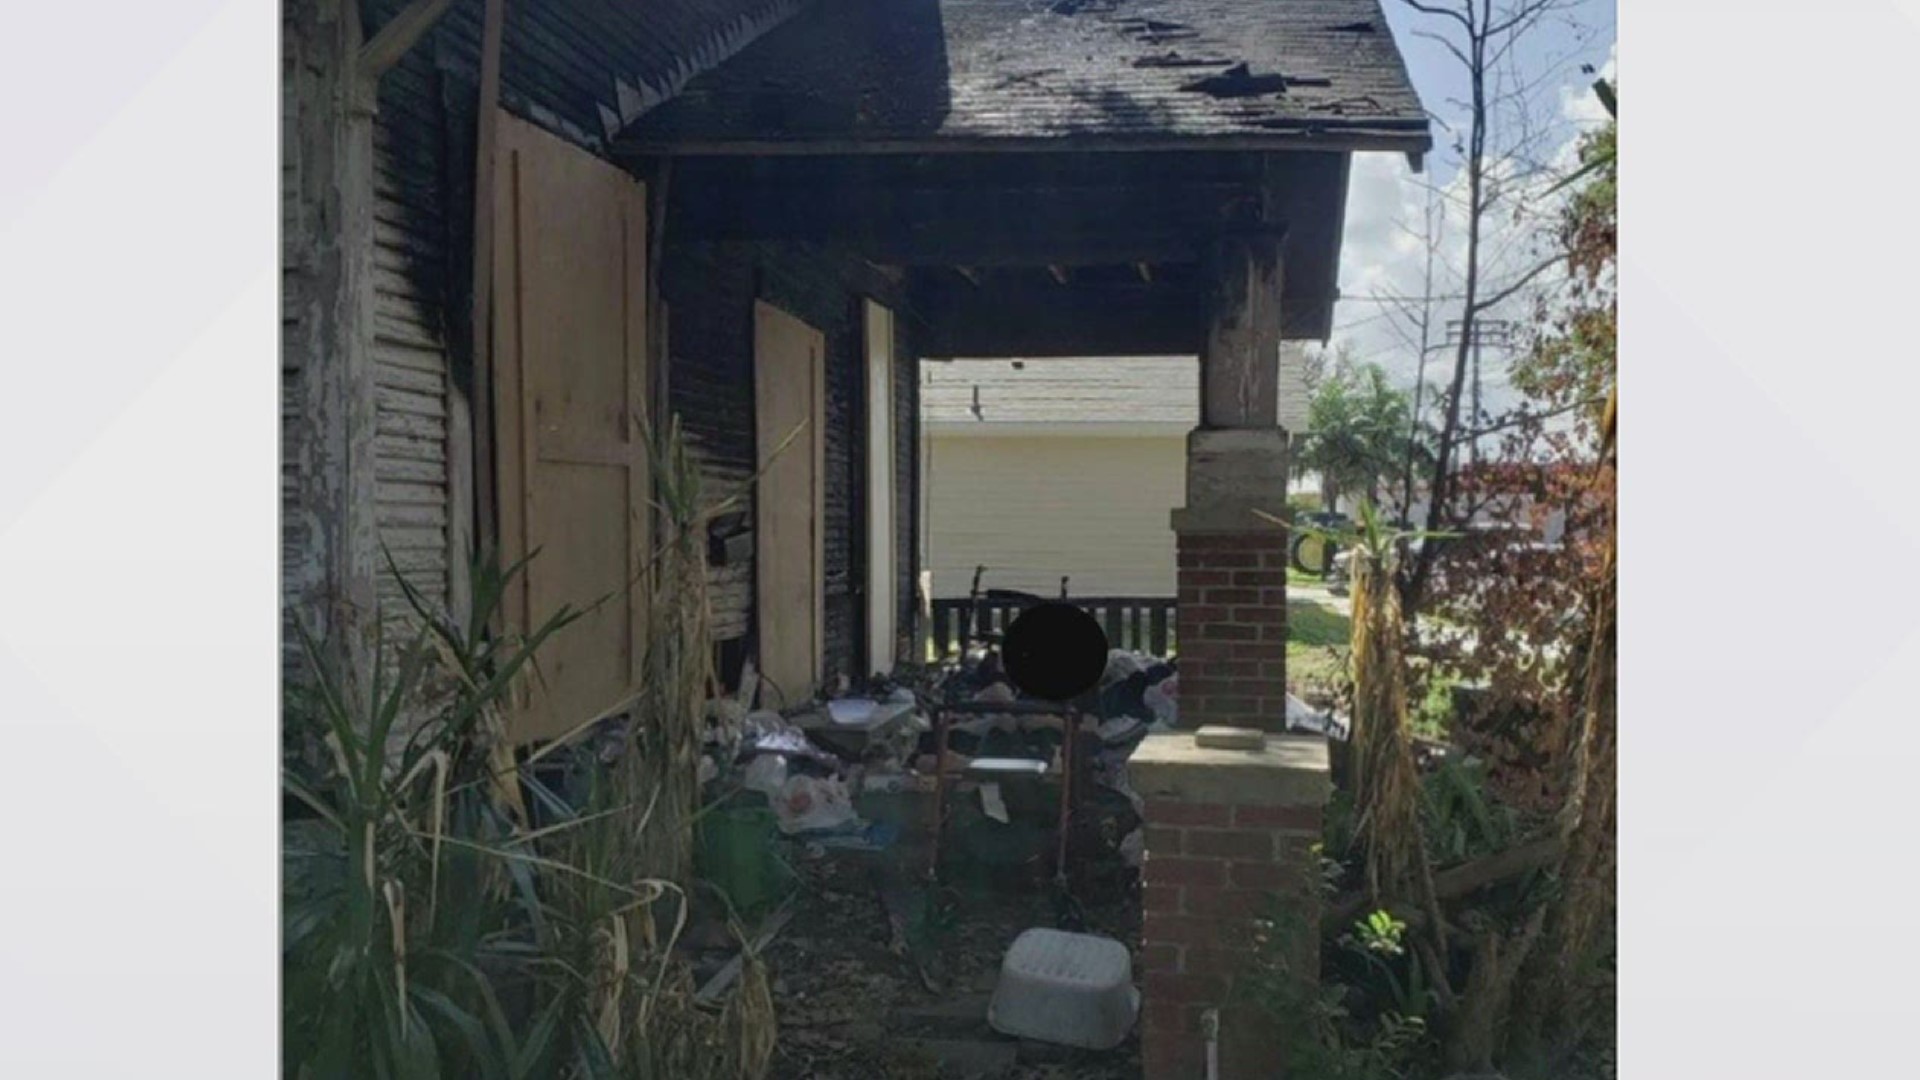 The 76-year-old woman was living in front of her home that was damaged after a fire.